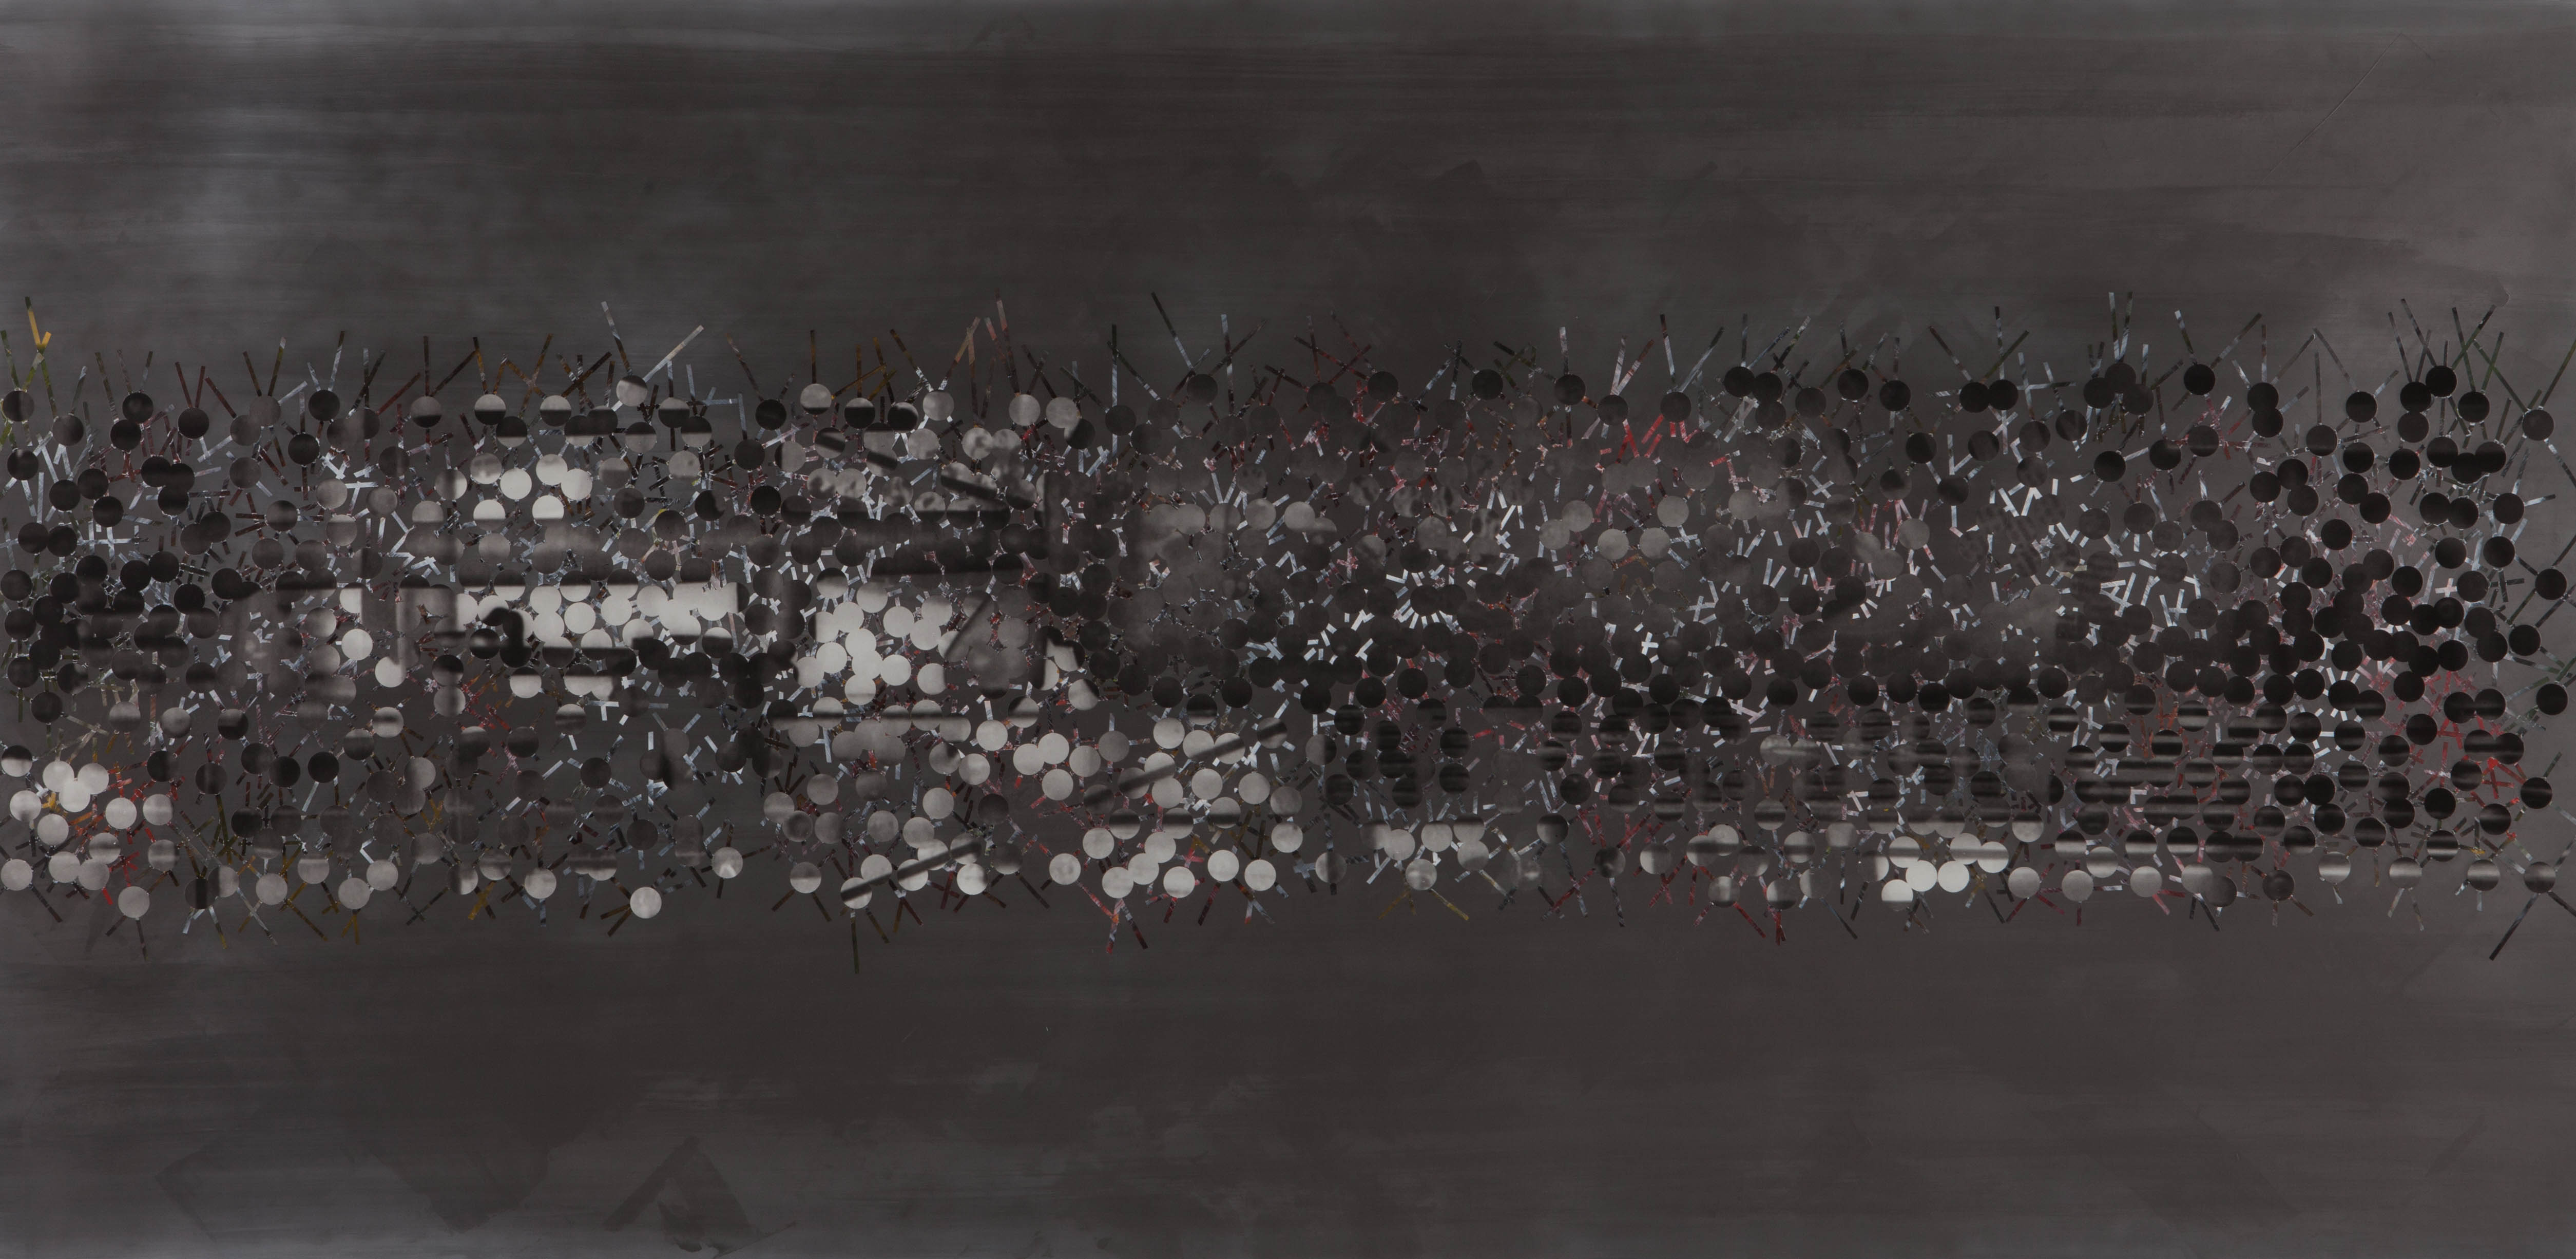 TRIBE 185 - 2013, acrylic, watercolor, graphite on paper, 35.5 x 72 inches (AVAILABLE)